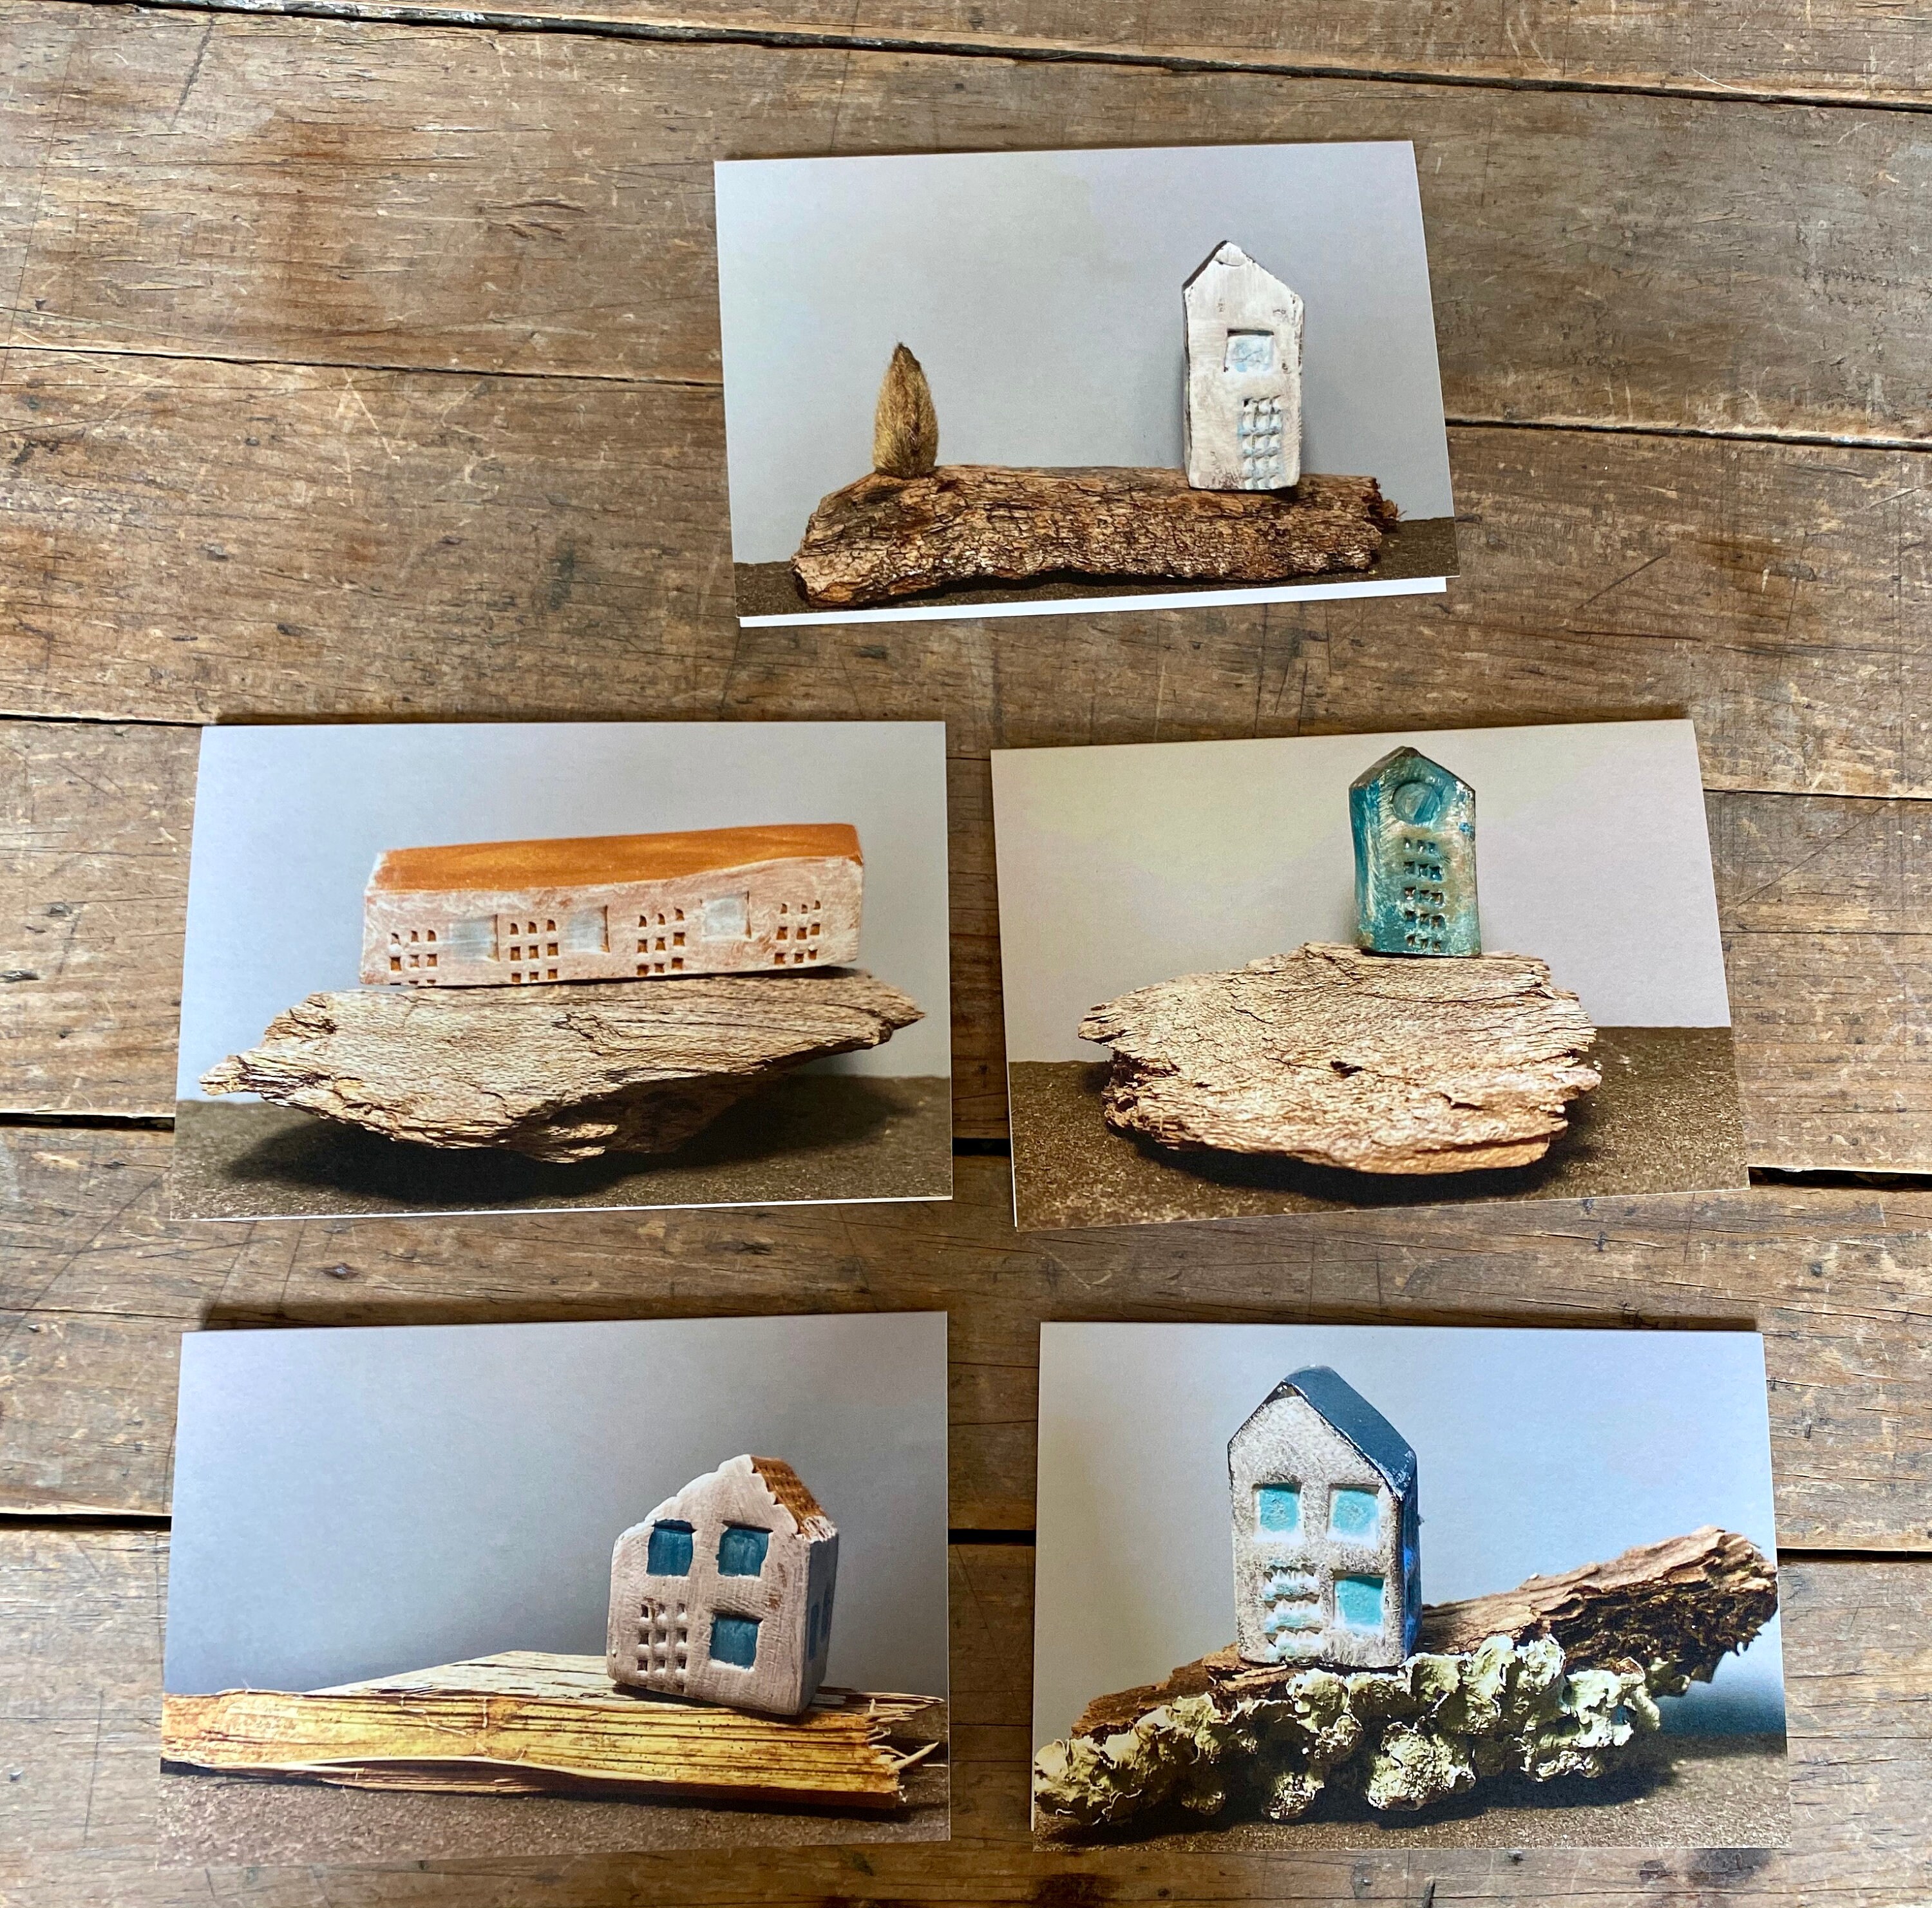 Pack of 5 4x6 Tiny Houses Sculpture Photo Cards W/envelopes Blank